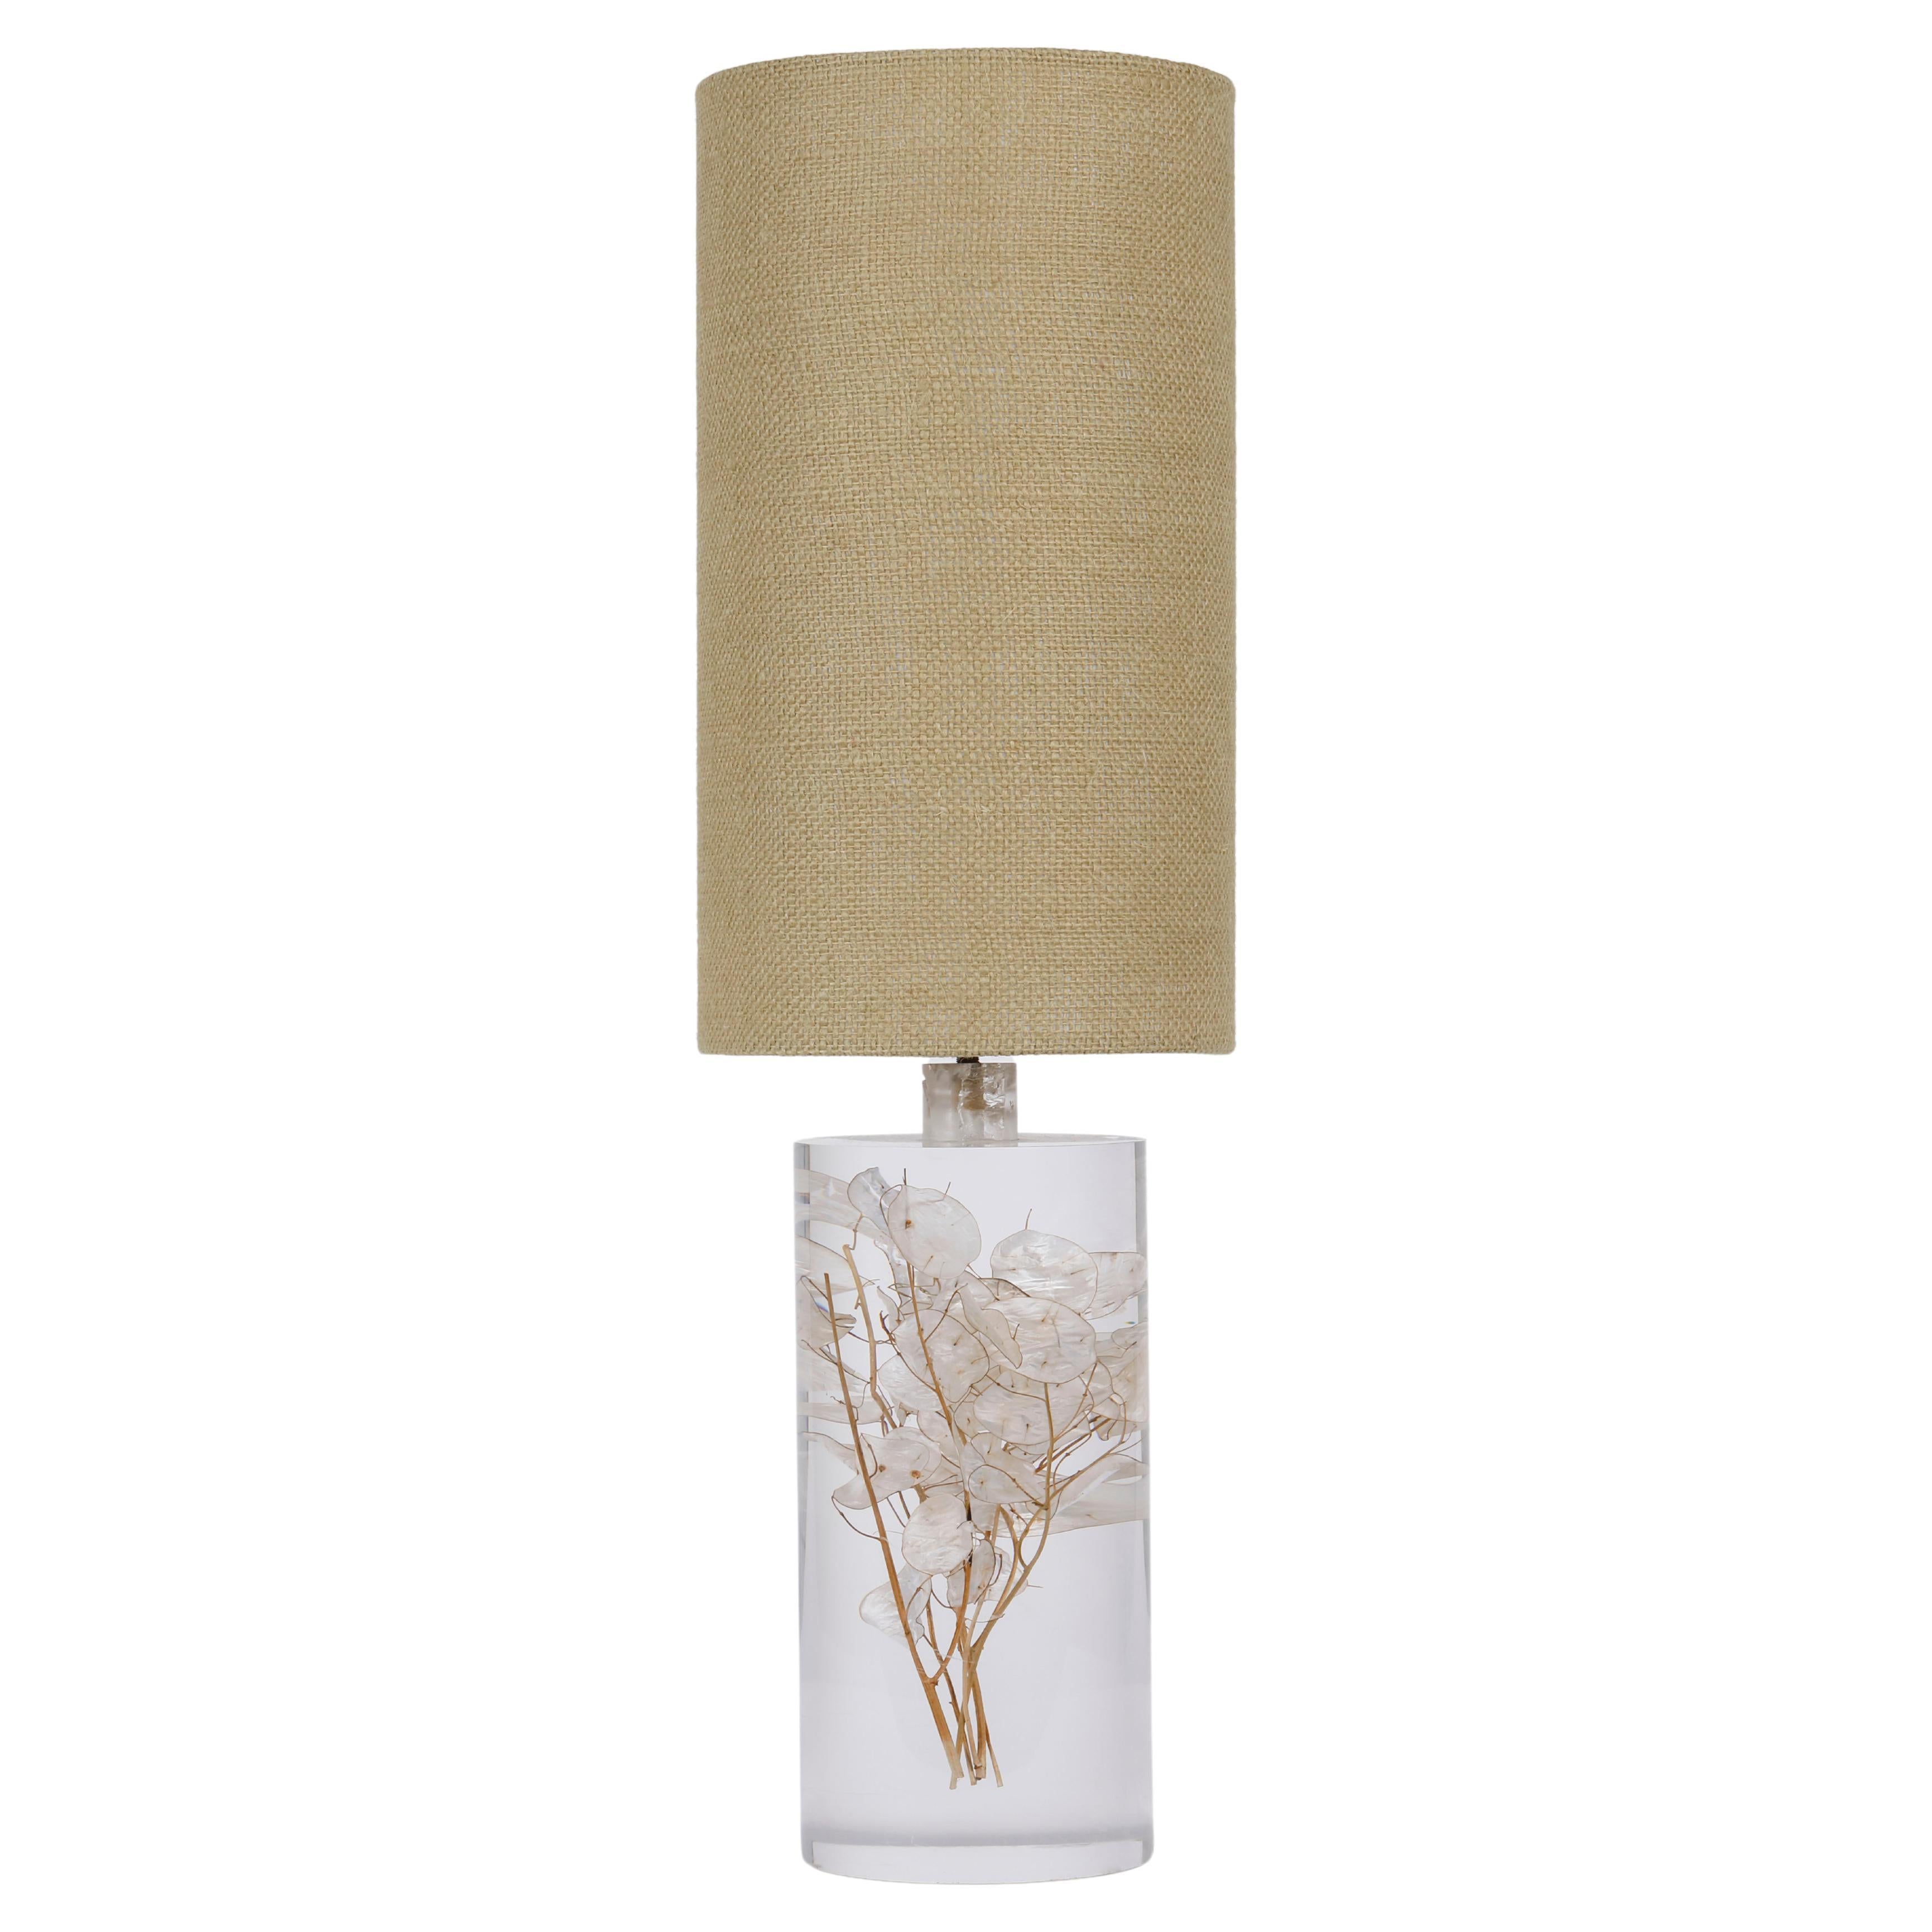 Resin table lamp with Lunaria annua inlay, 1970, France